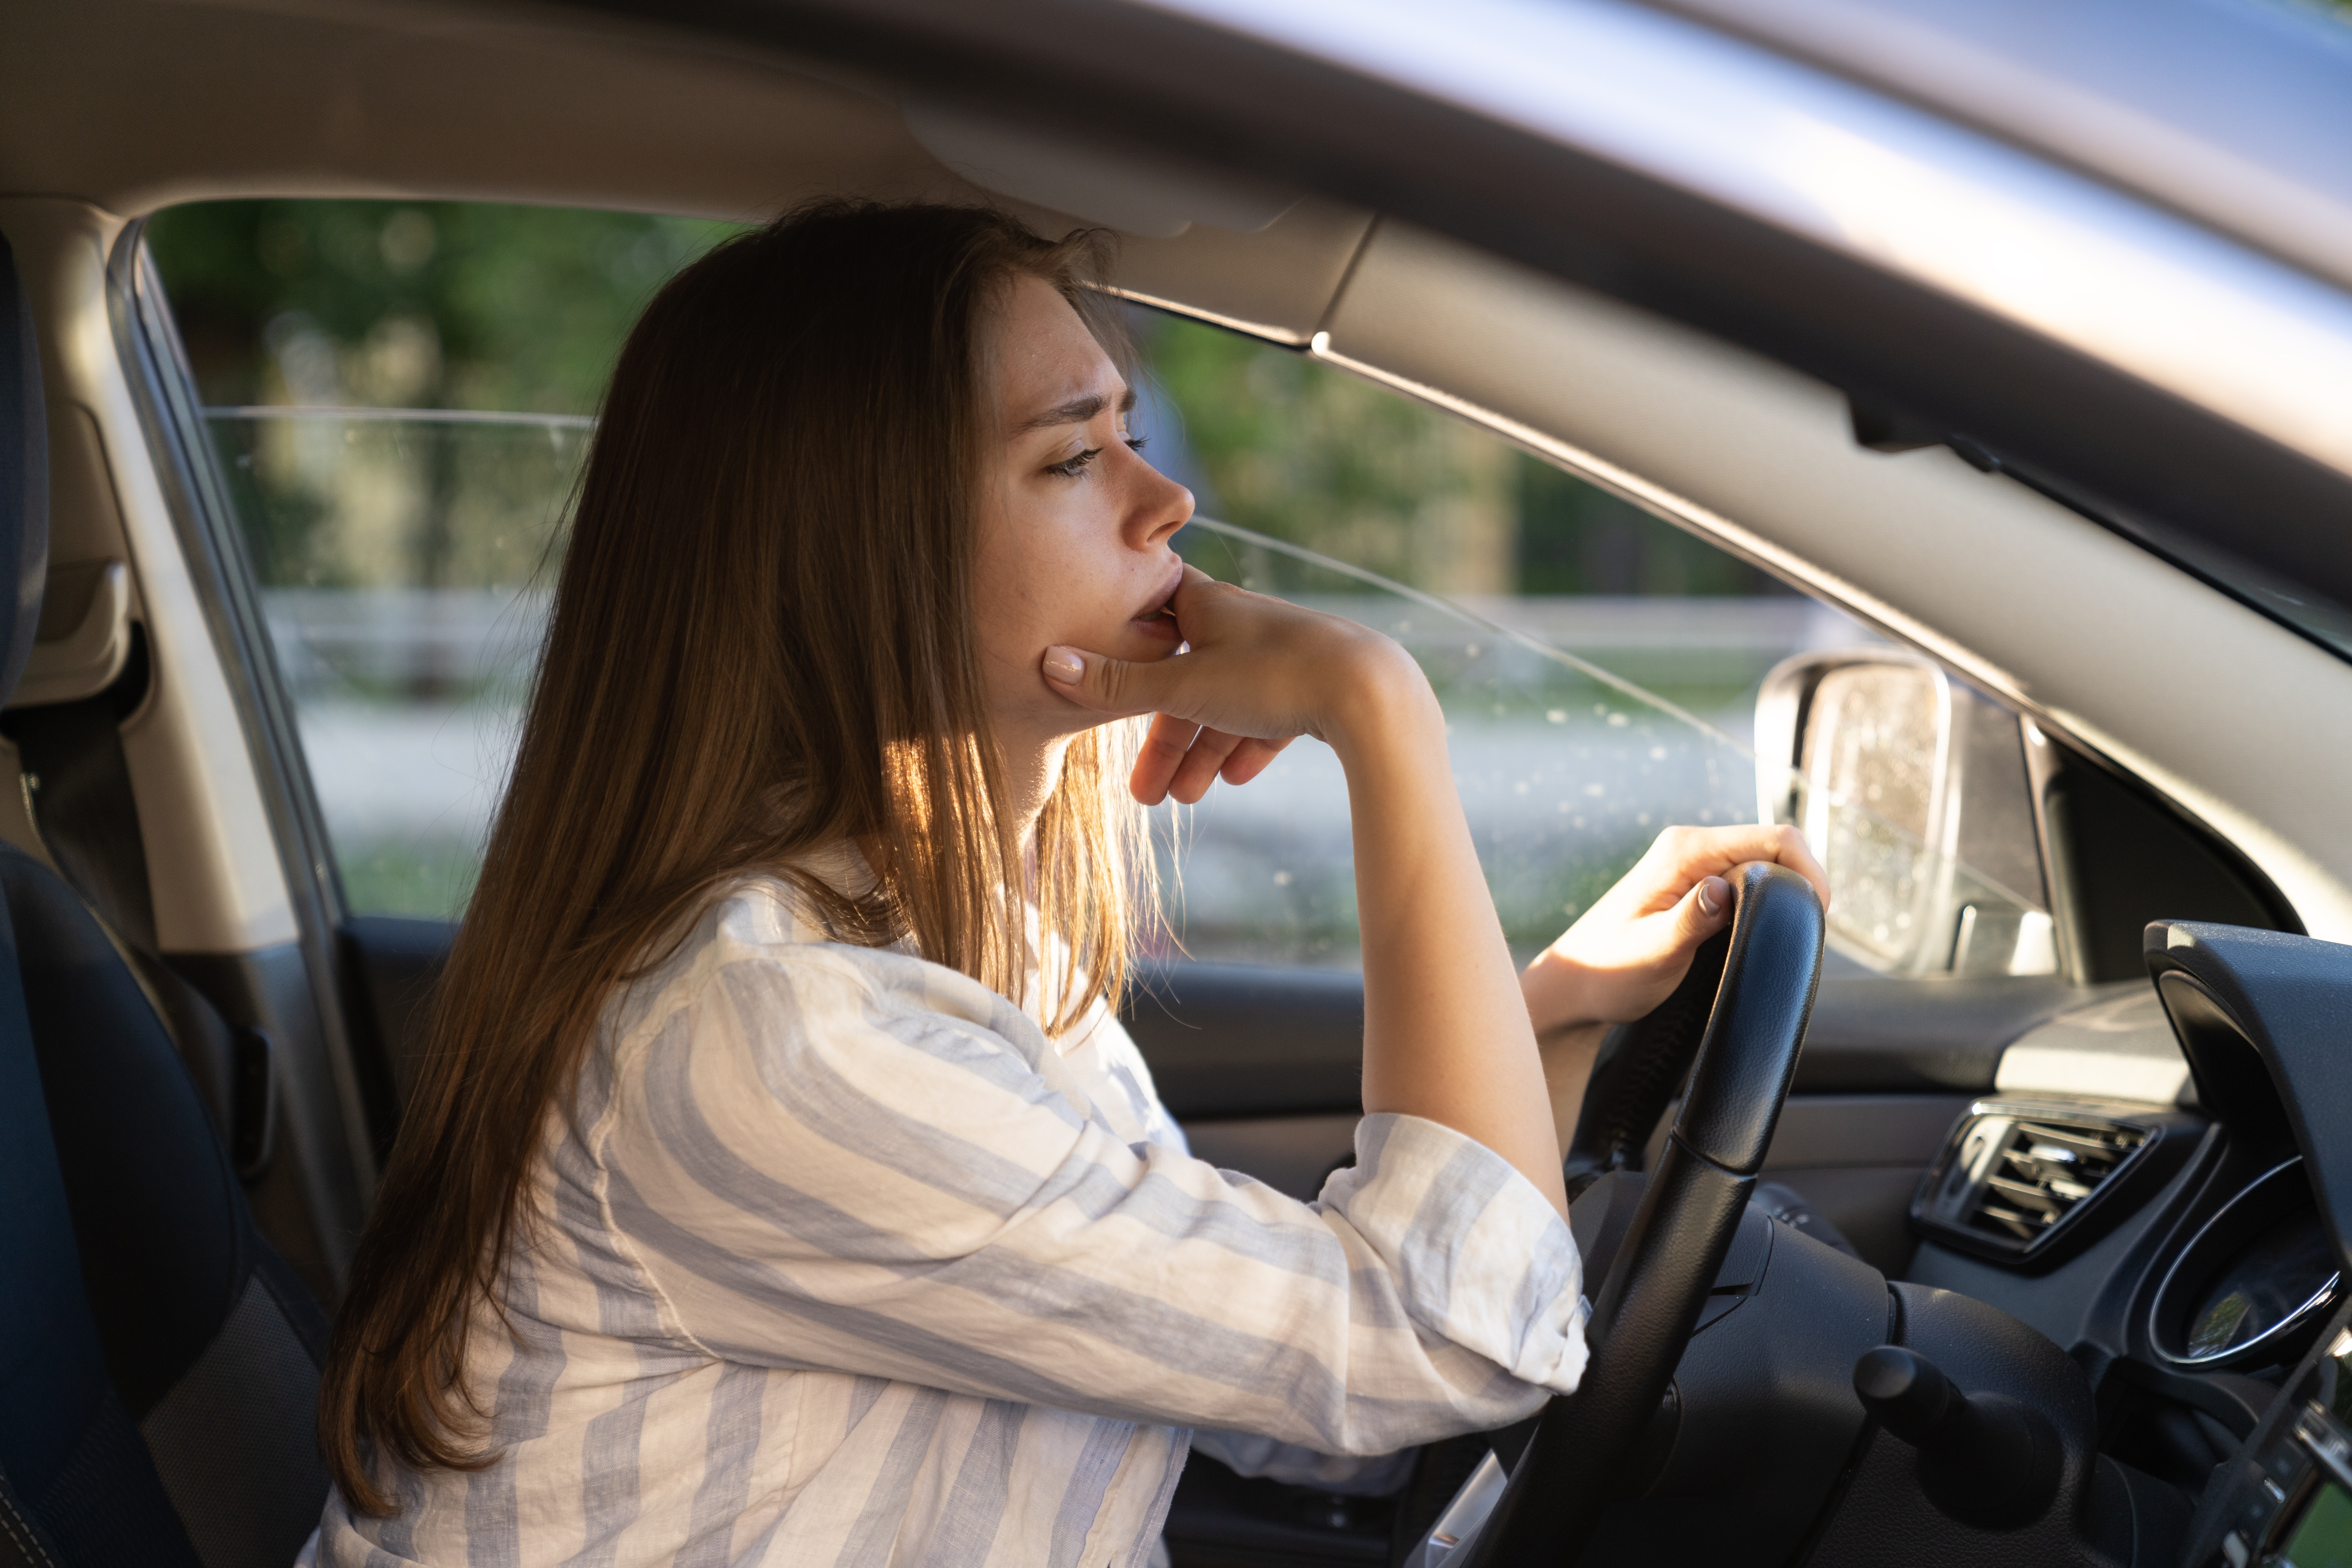 A sad, tired young woman driving a car | Source: Shutterstock